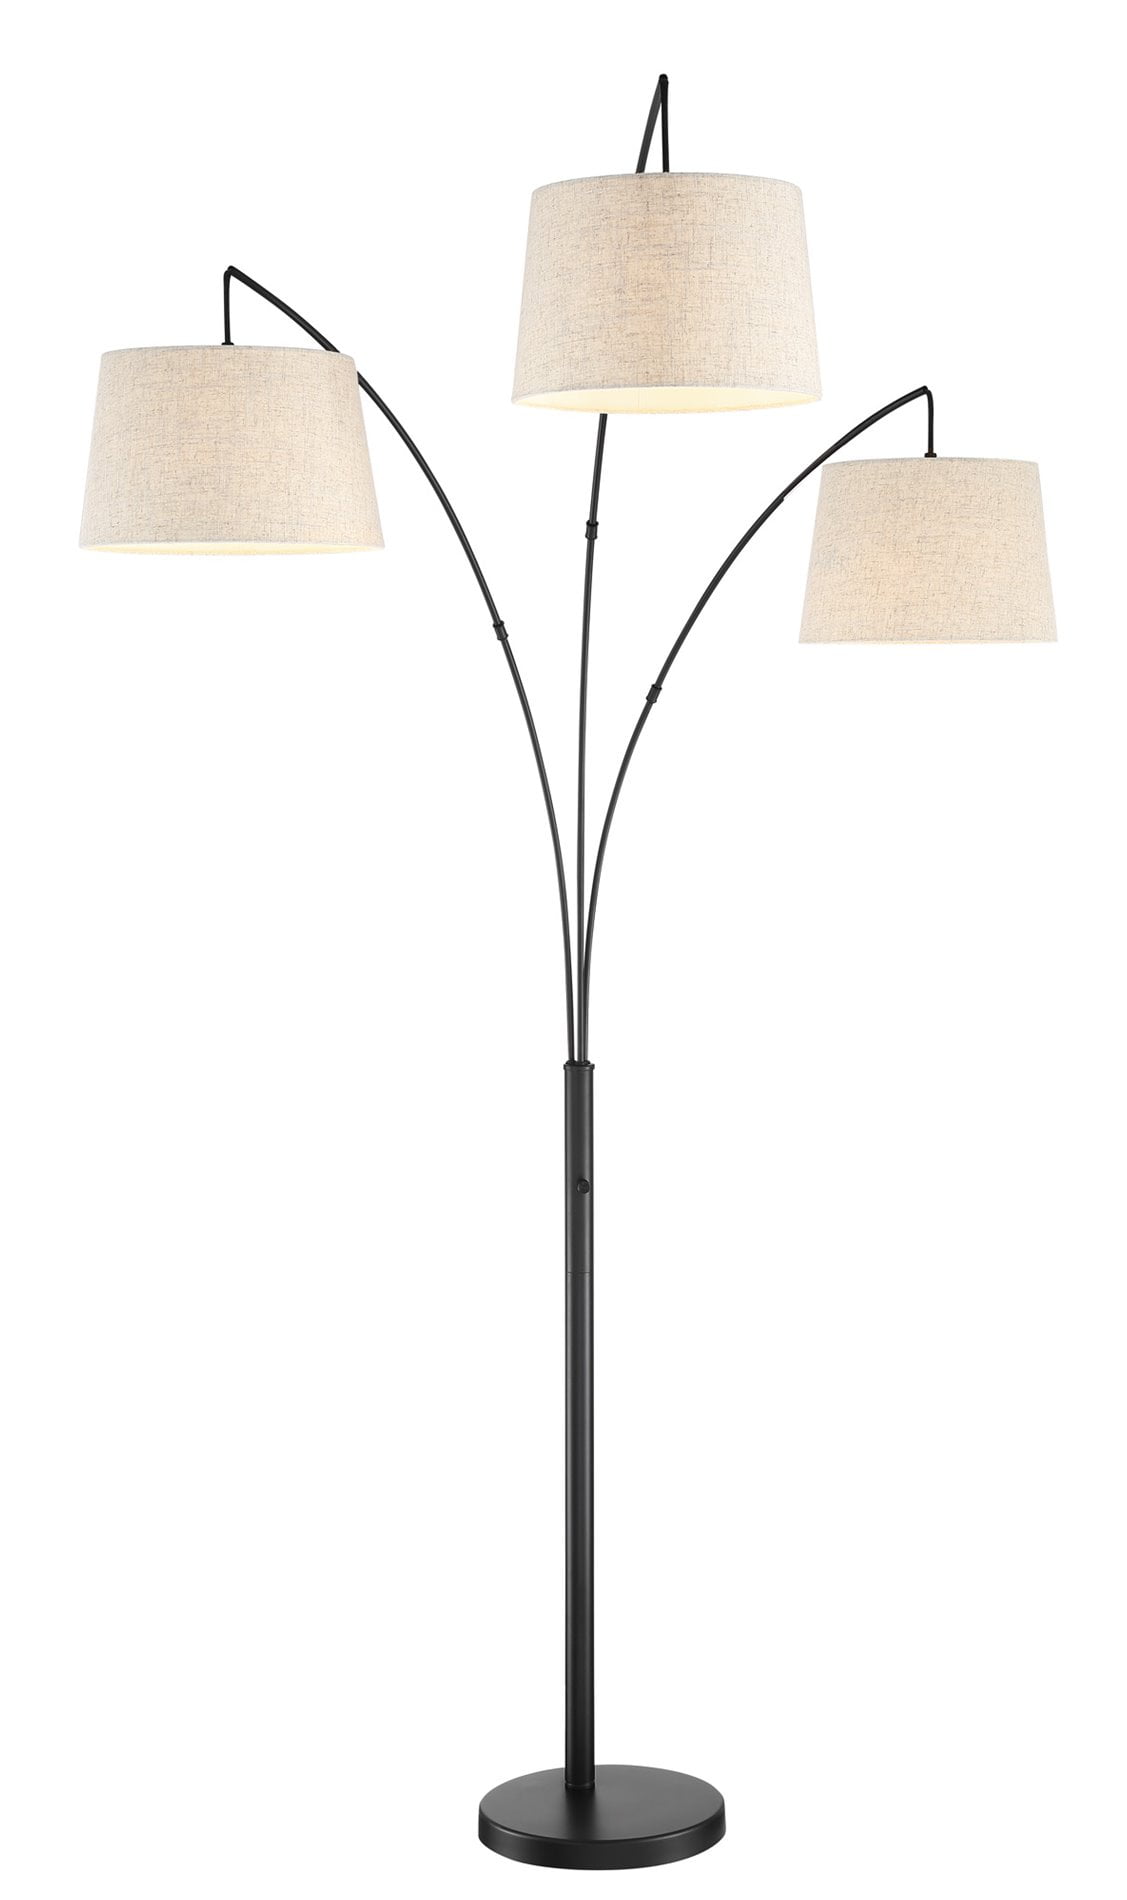 3-Head Arching Tree Lamp 3 Lightshanging Over The Couch from Behind hykolity Black Trinity Arc Floor Lamp withheavy Base Bulbs Sold Separately Modern & Contemporary Rooms for Mid Century 